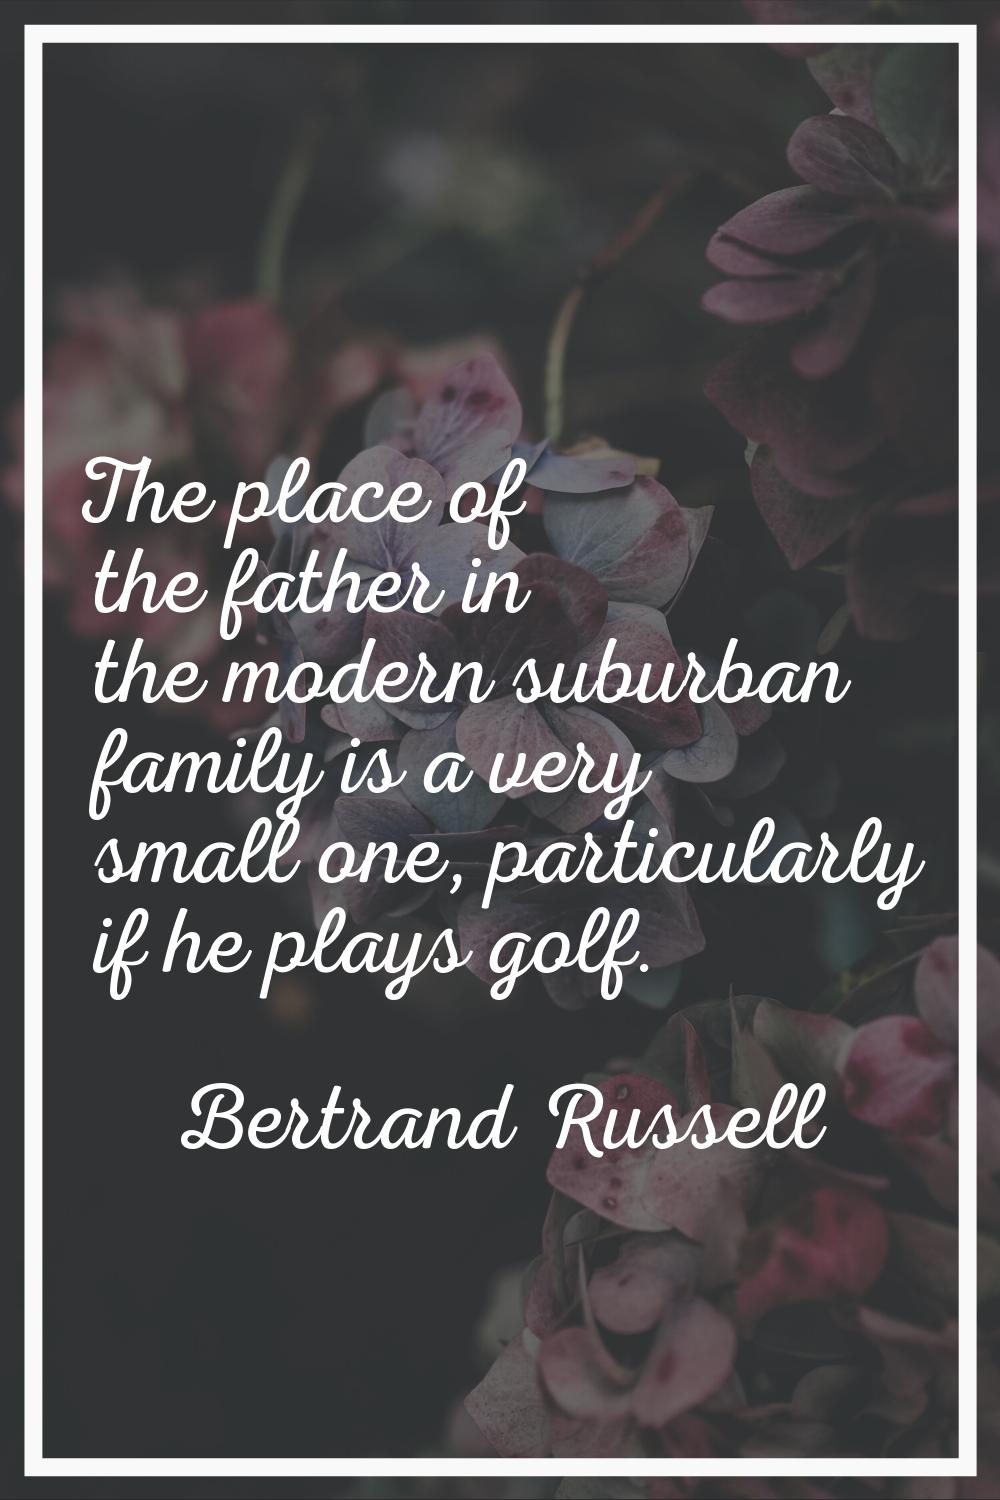 The place of the father in the modern suburban family is a very small one, particularly if he plays